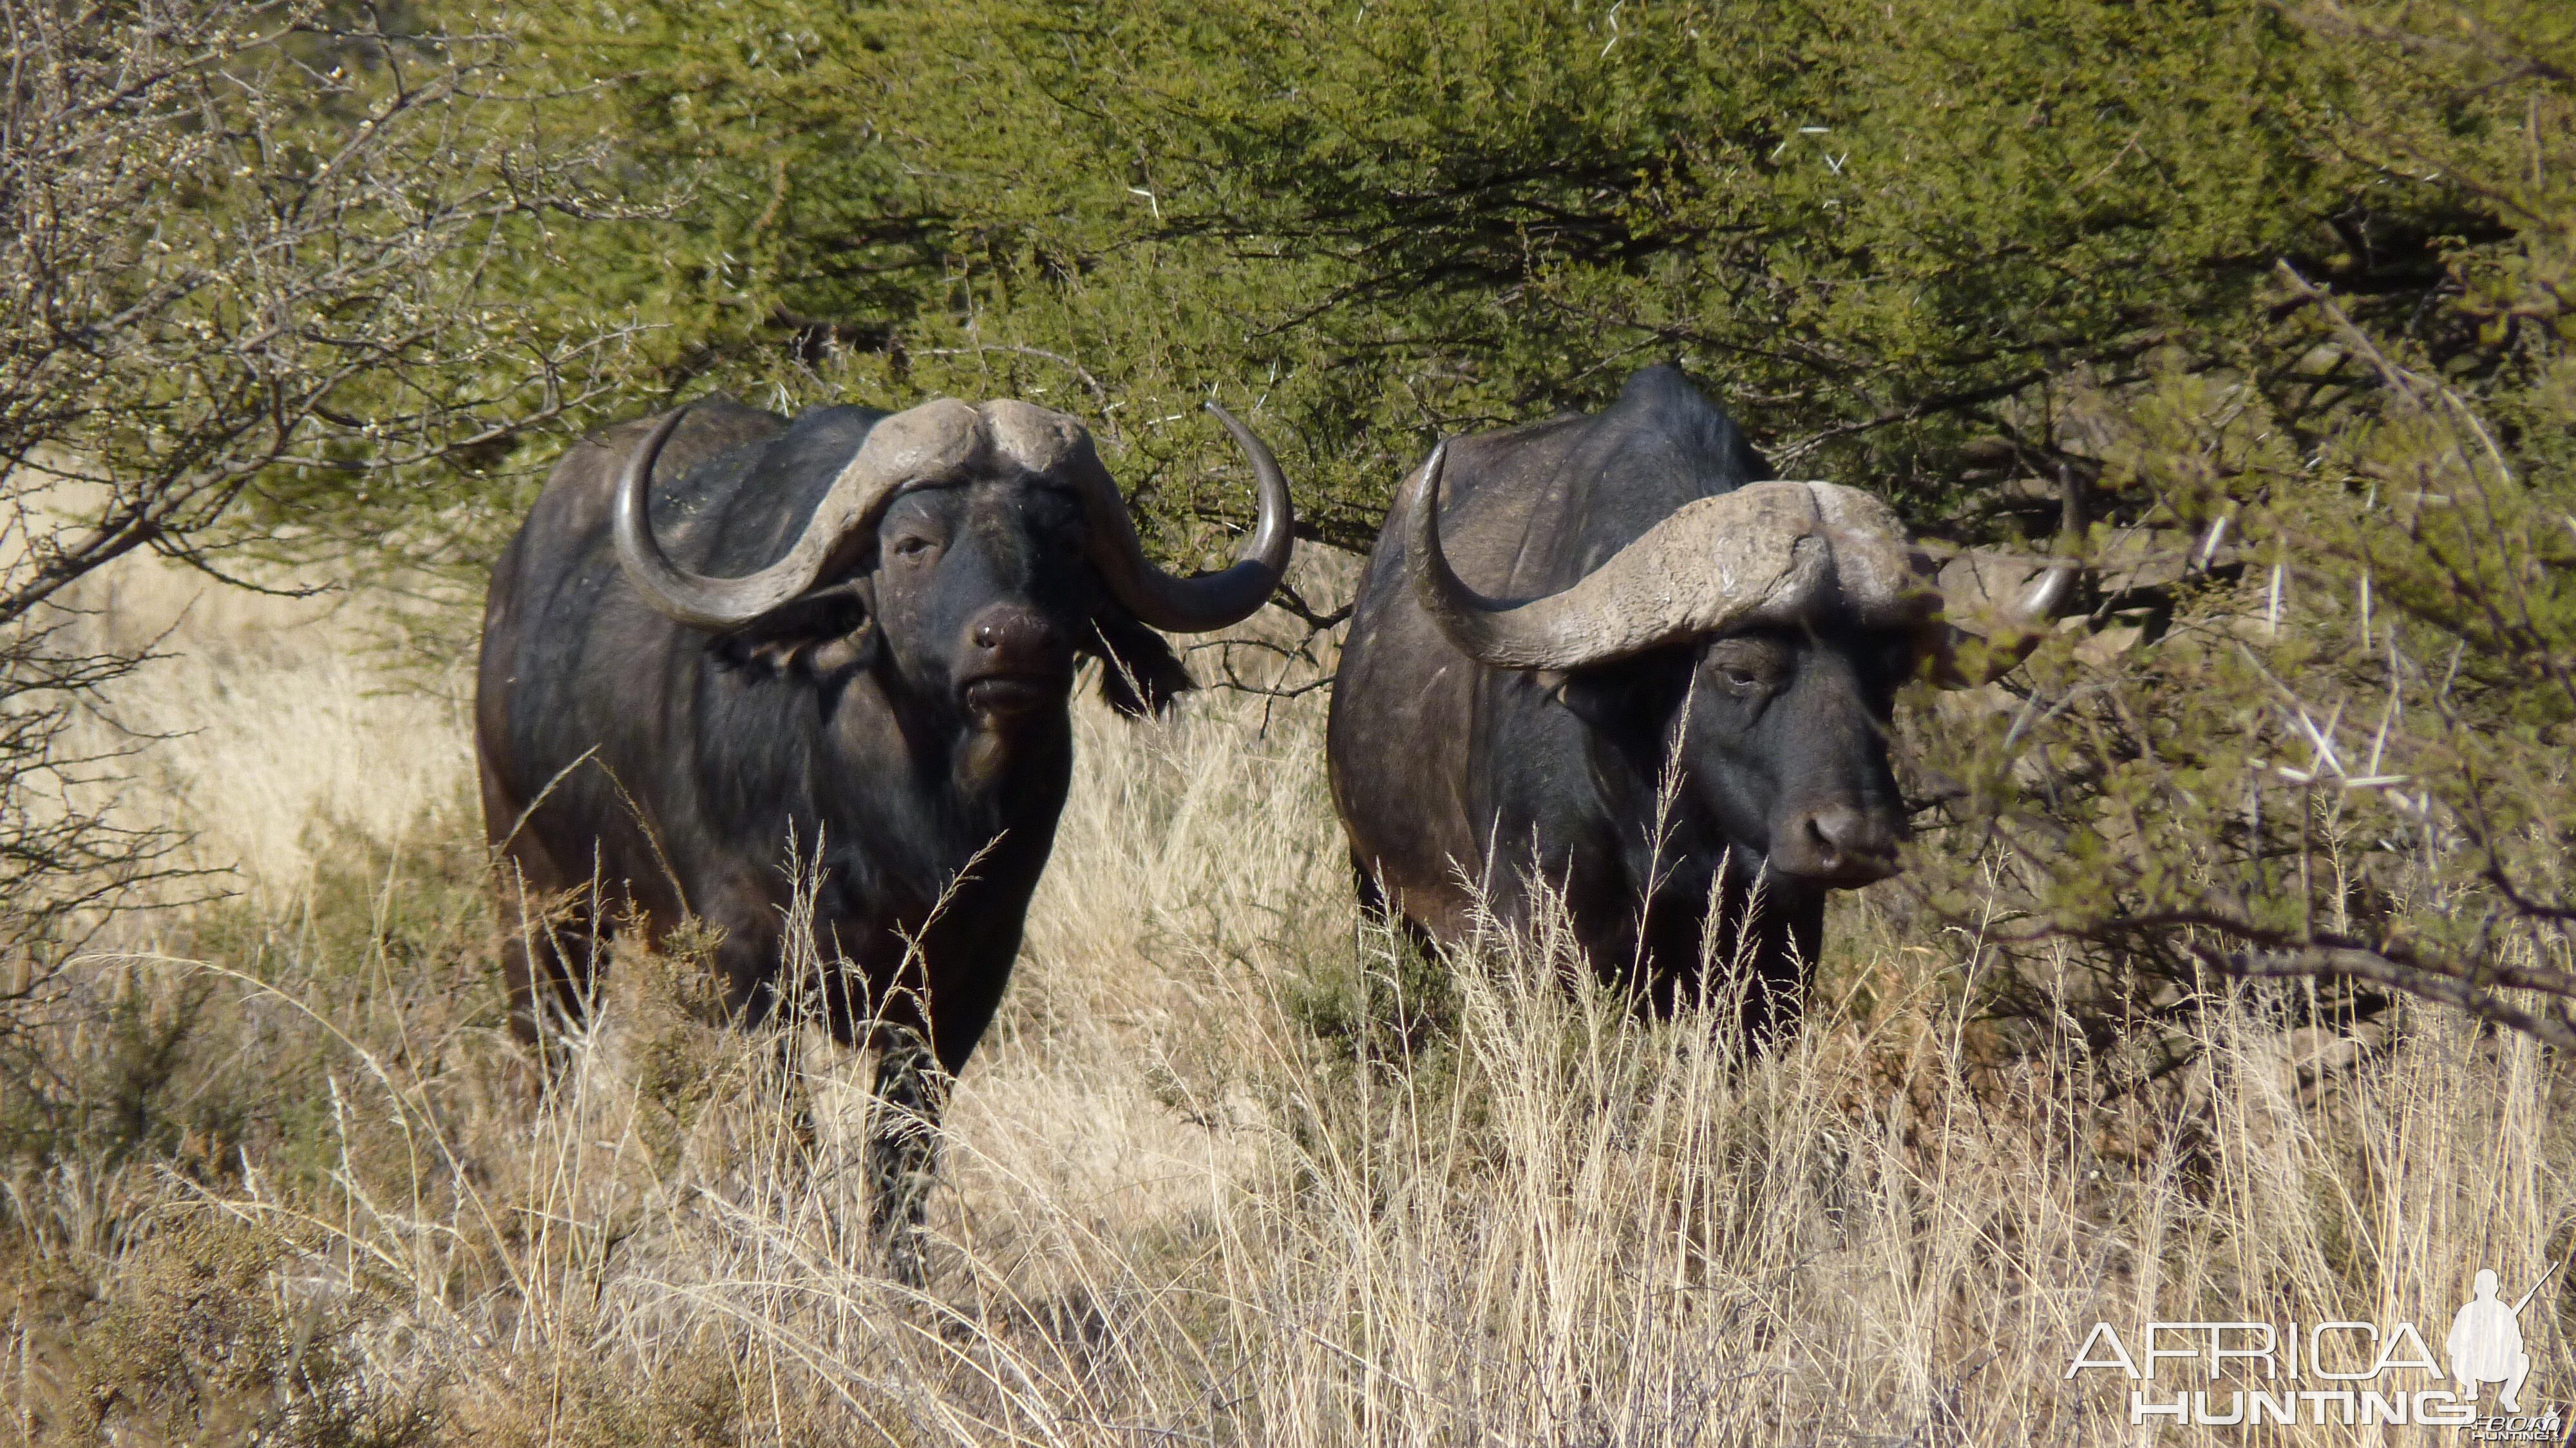 Buffaloes in South Africa